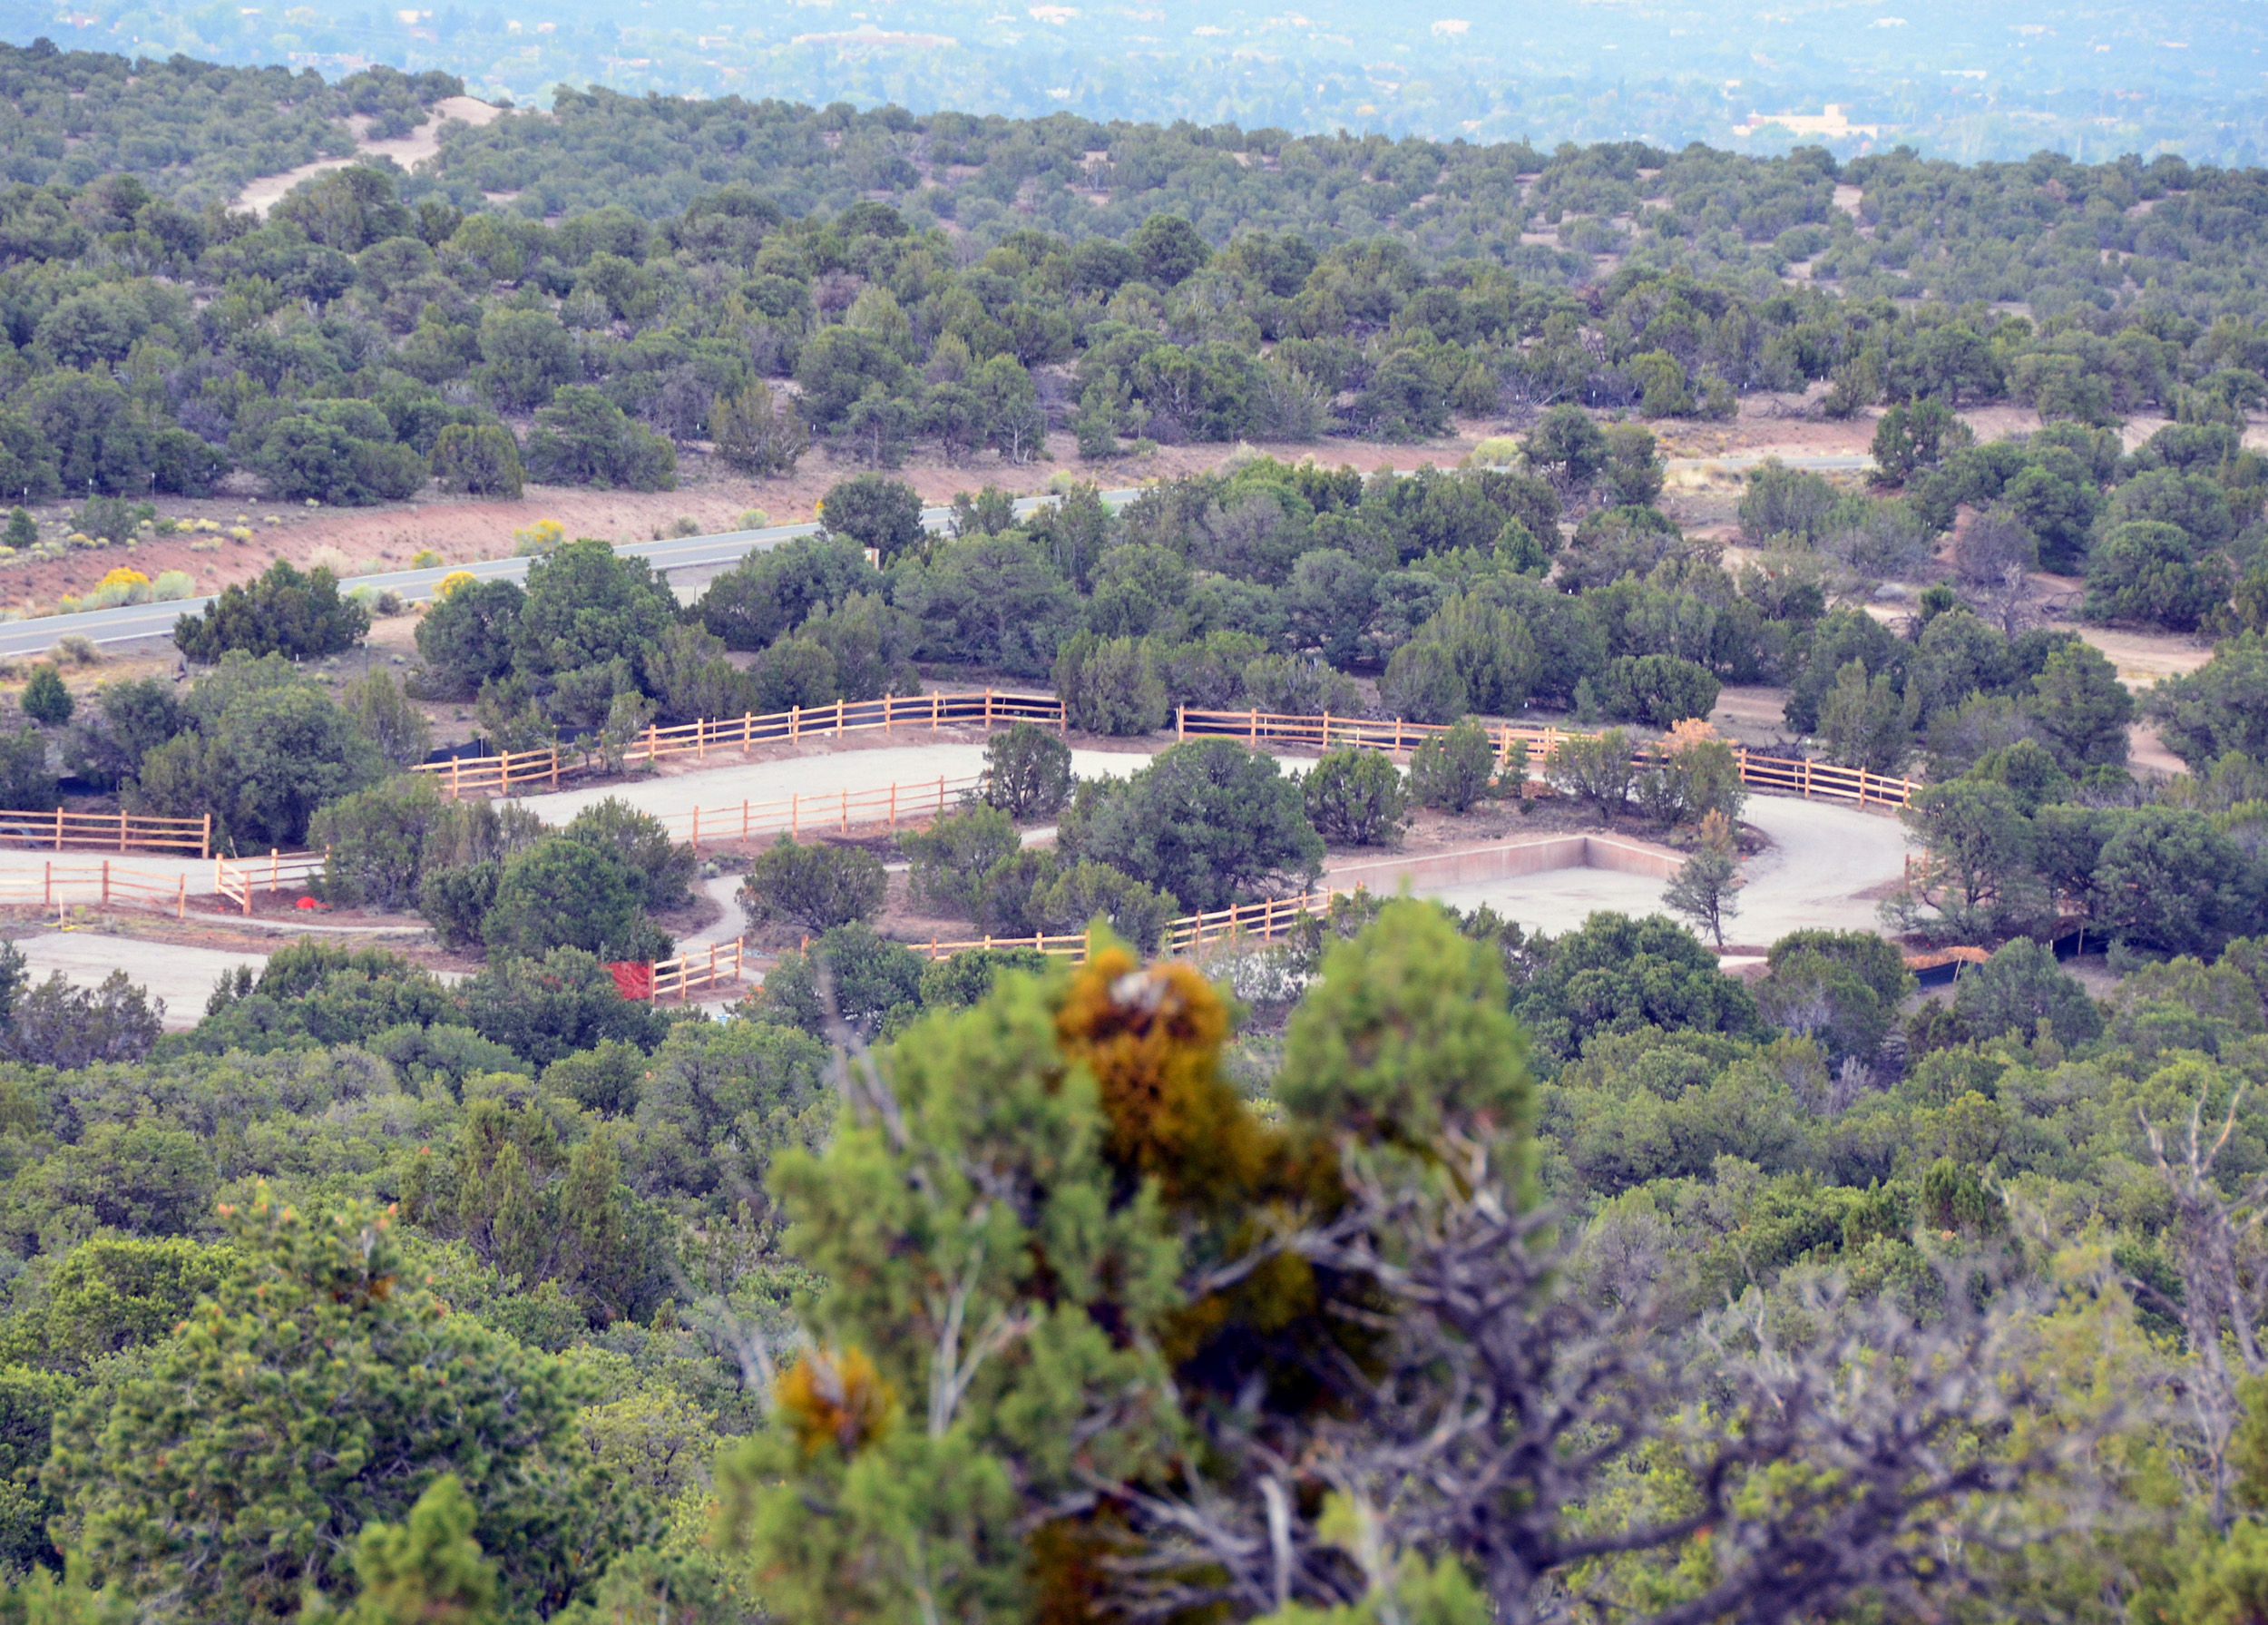 The La Tierra Trails complements existing recreational trails around Santa Fe and expands the City’s wilderness trail offerings to over 60 miles.